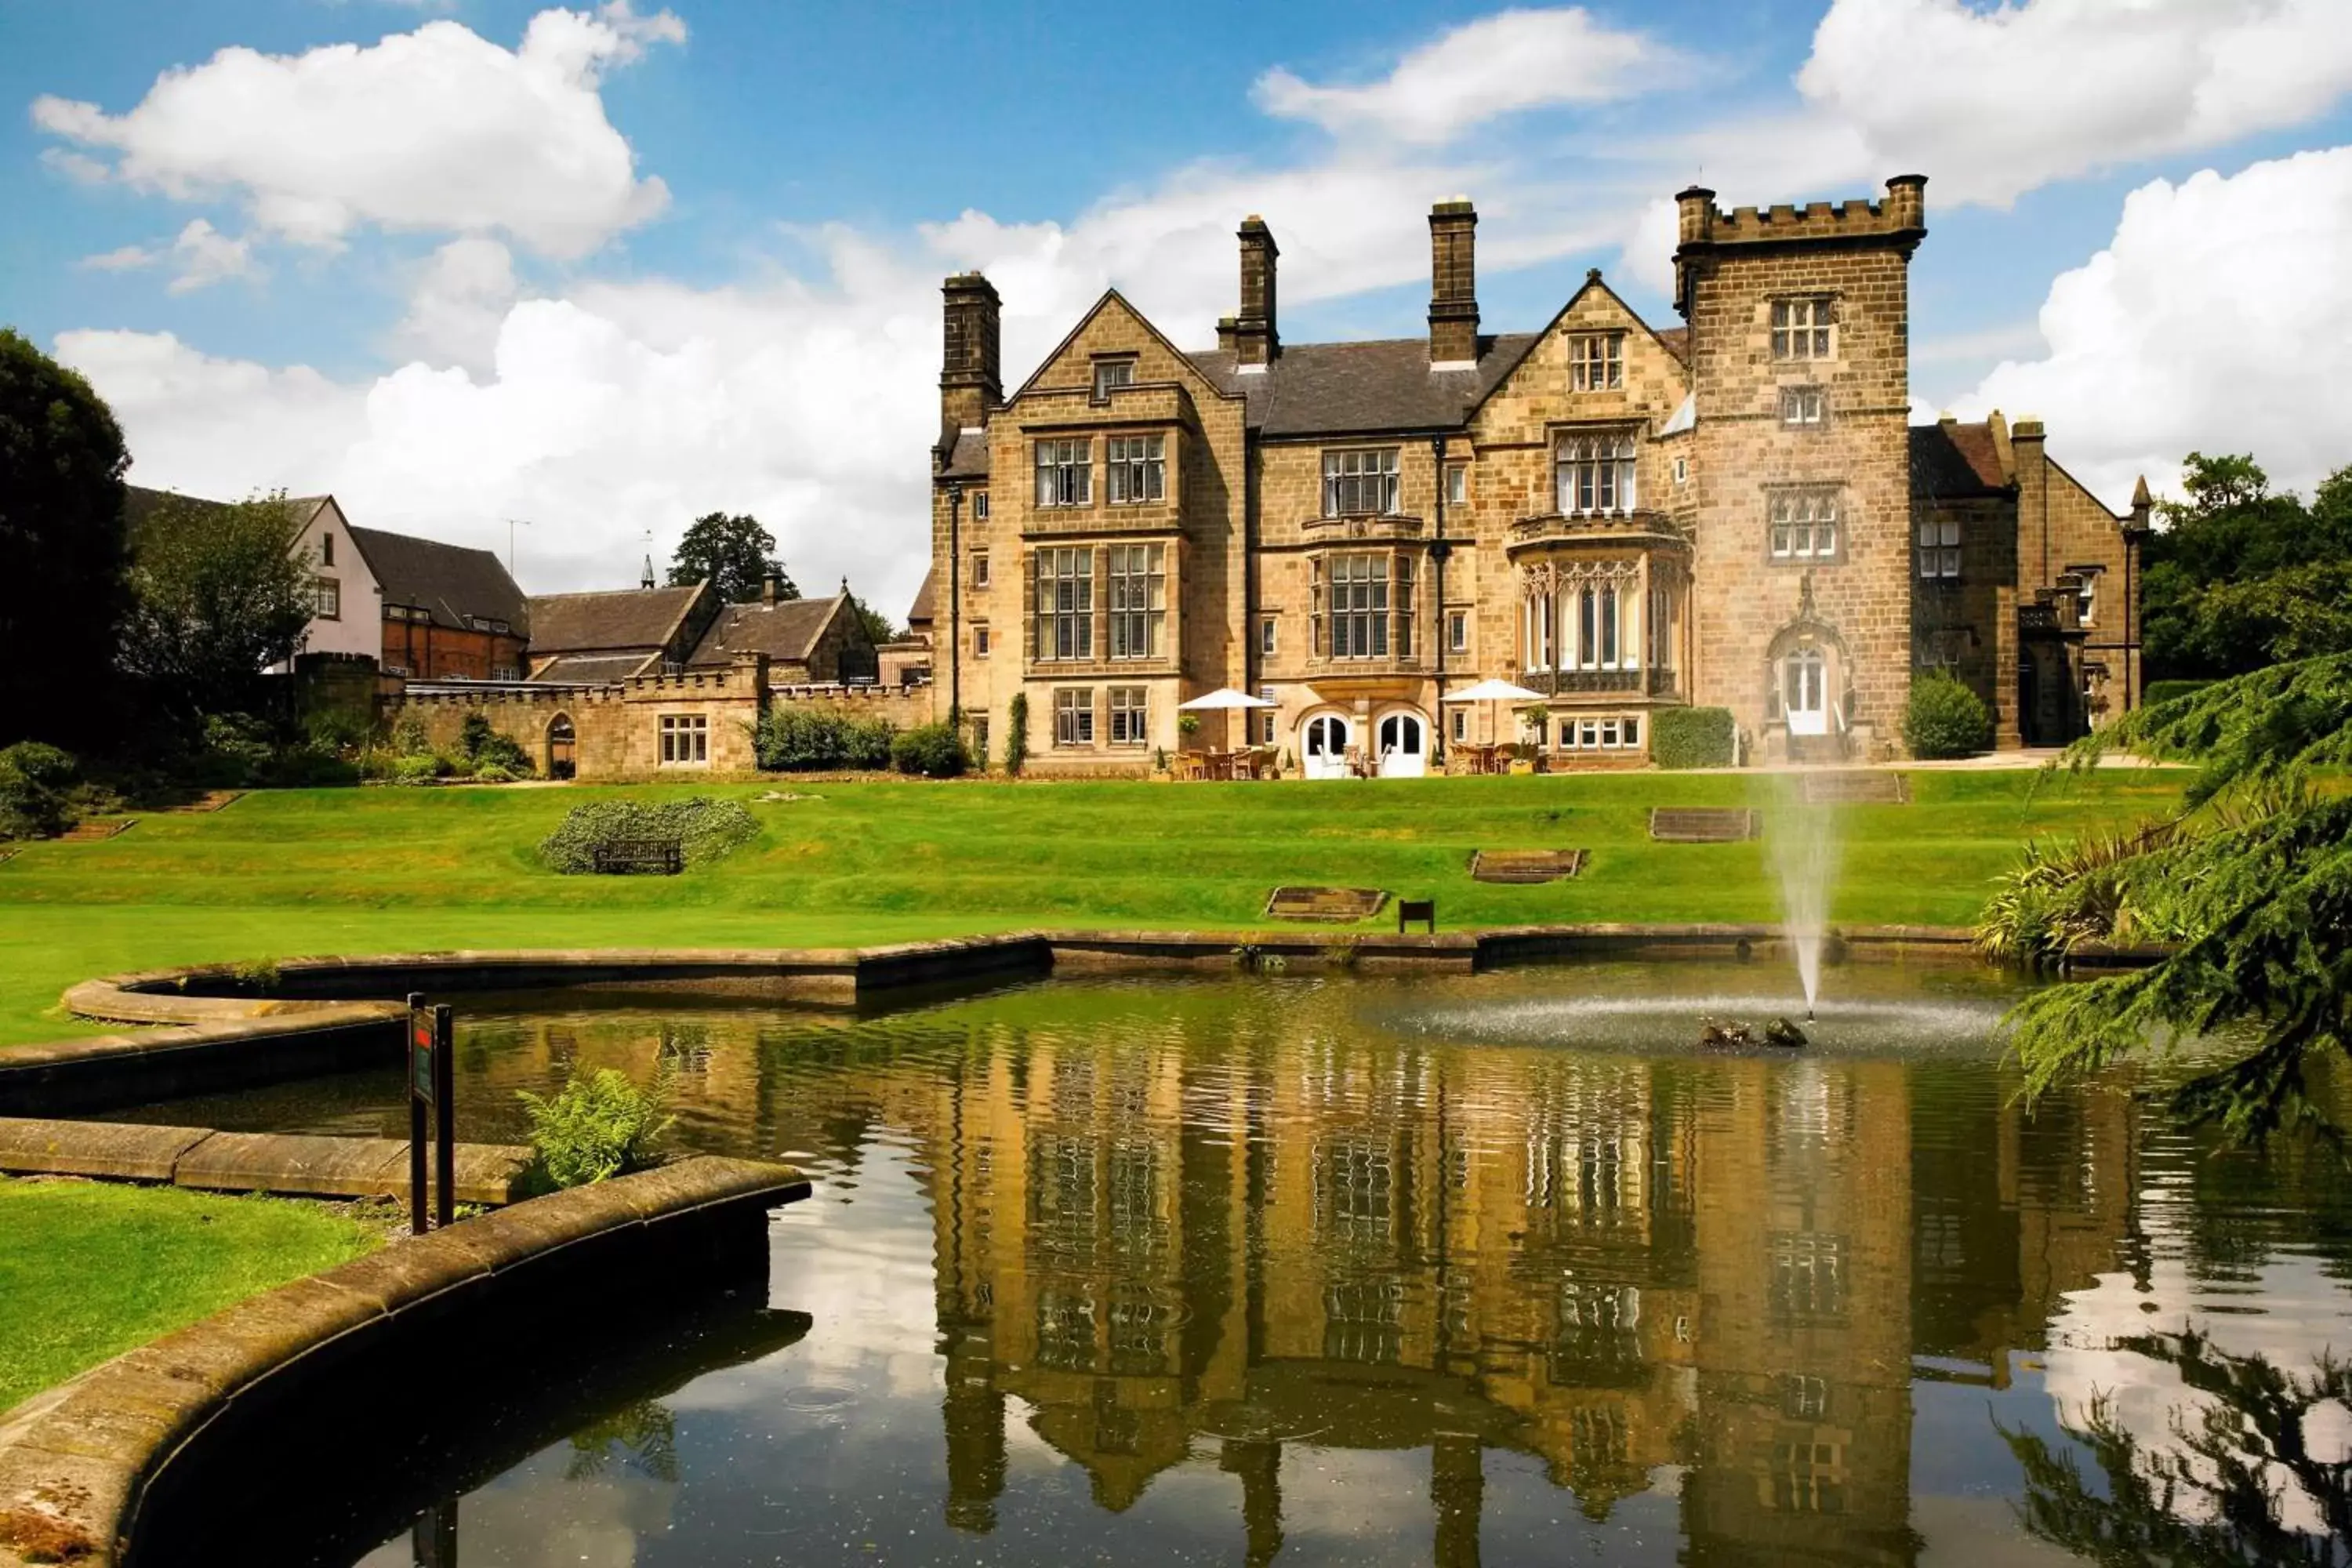 Property building in Delta Hotels by Marriott Breadsall Priory Country Club